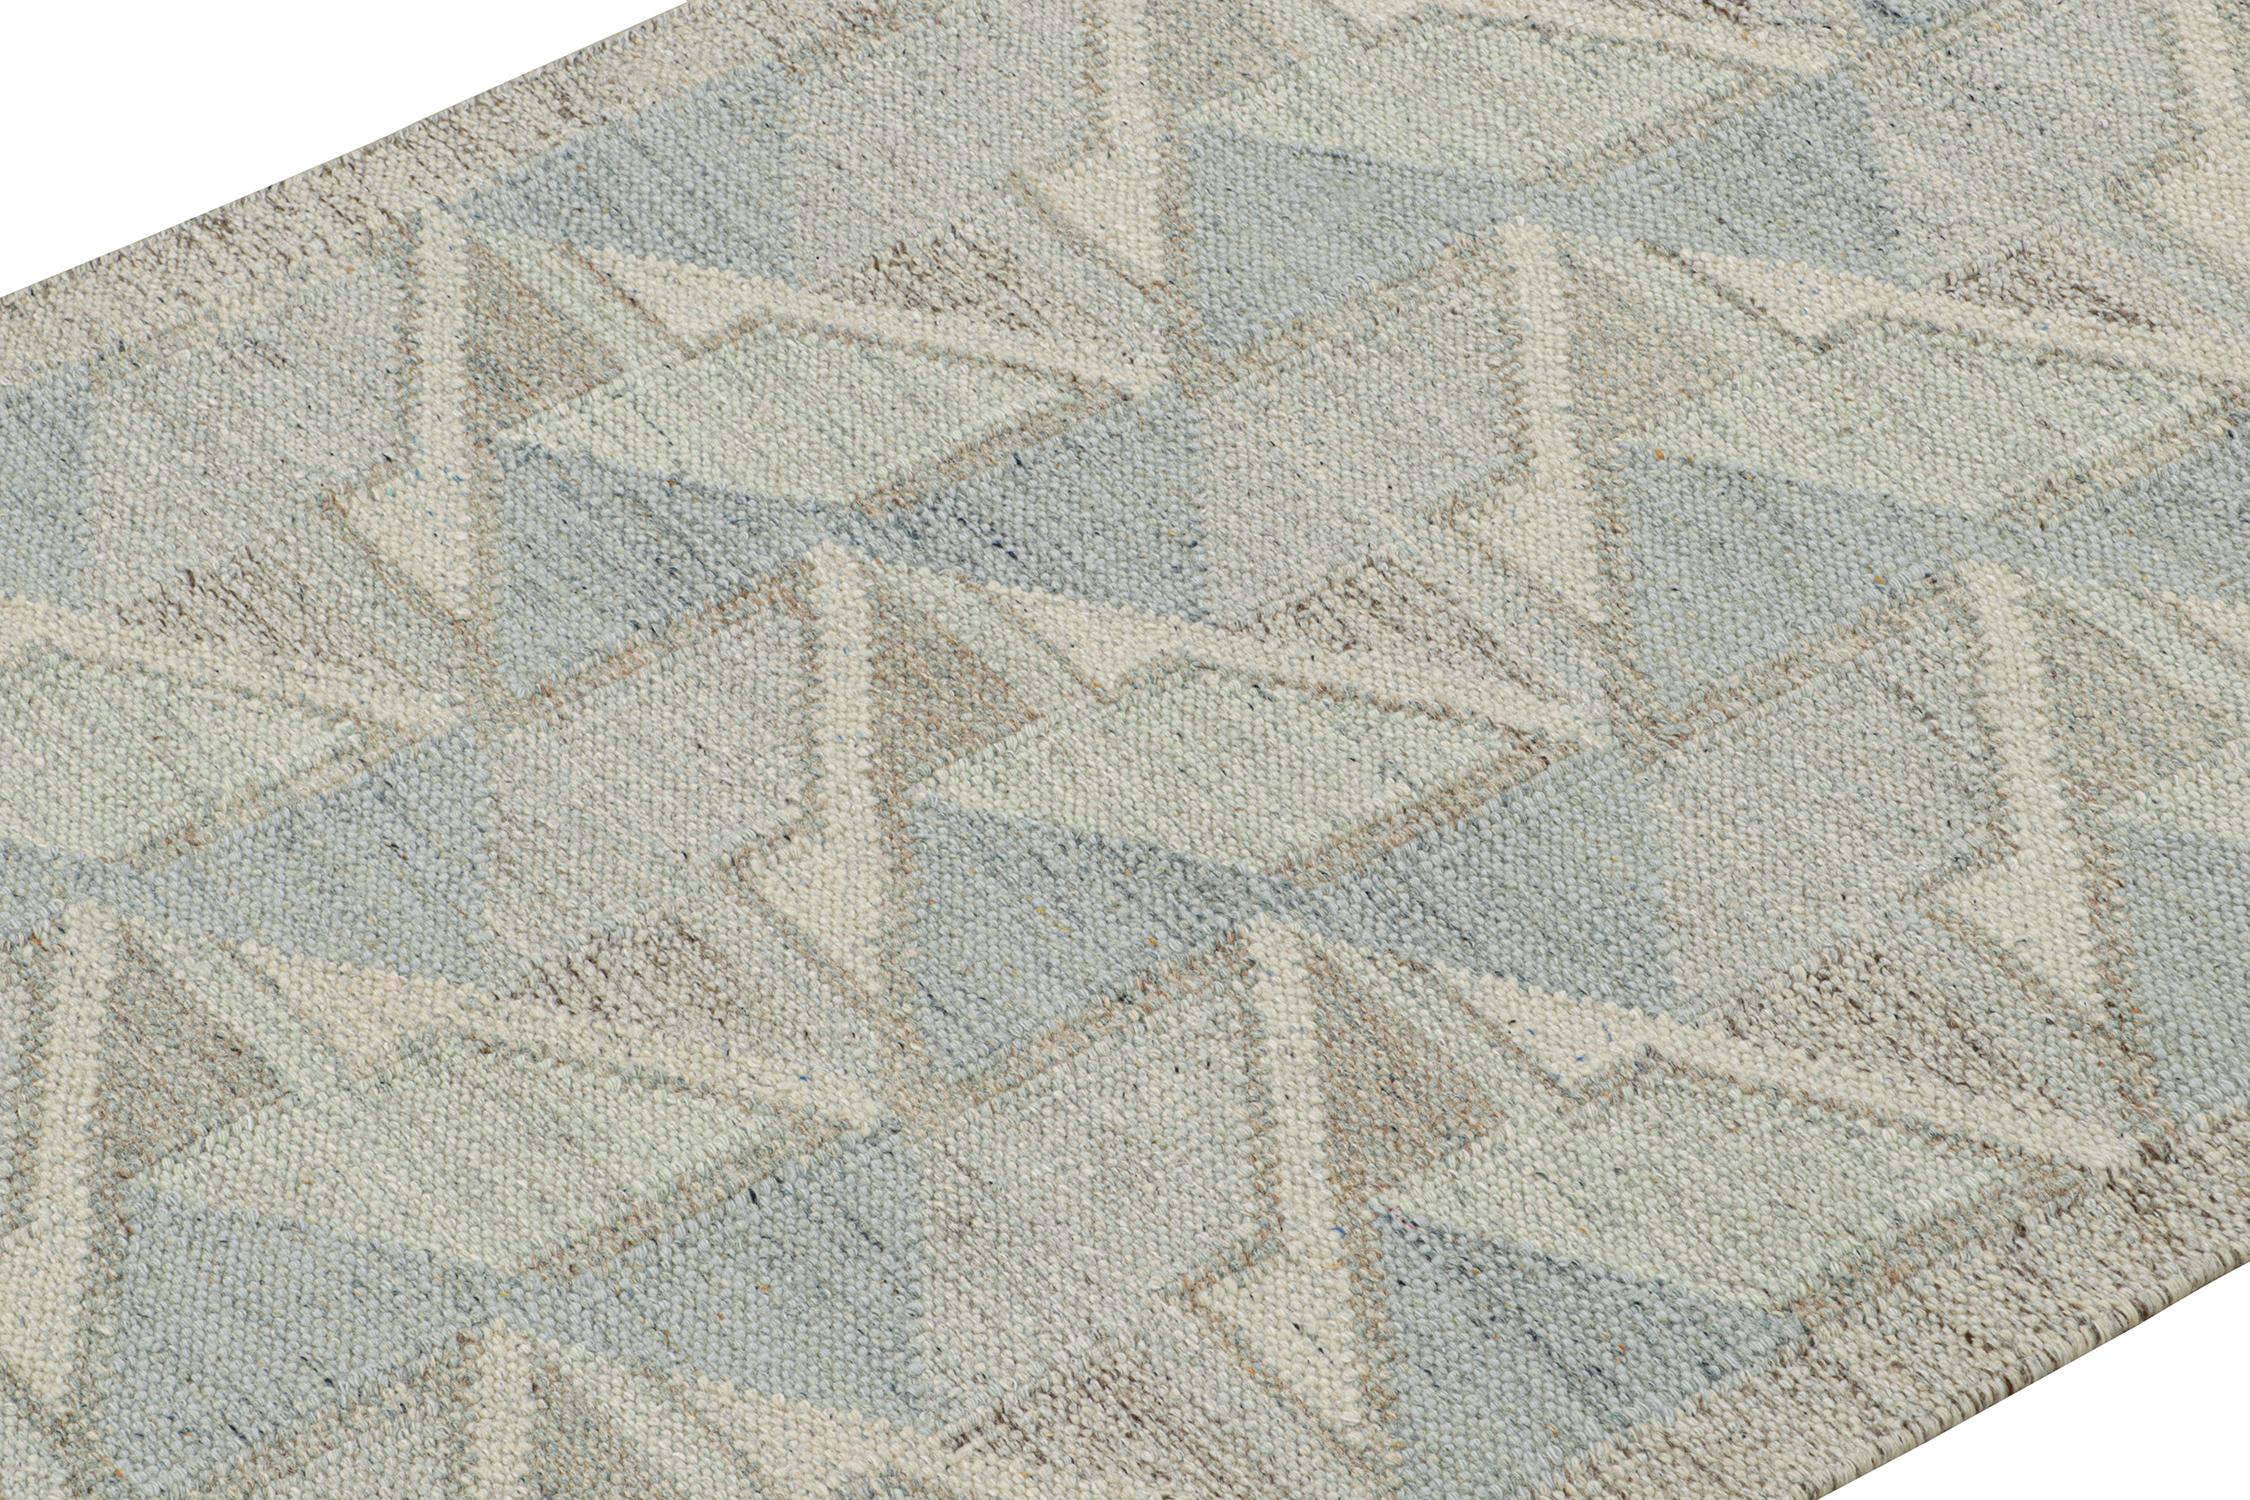 Indian Rug & Kilim’s Scandinavian Style Kilim in Gray, White, & Blue Geometric Patterns For Sale